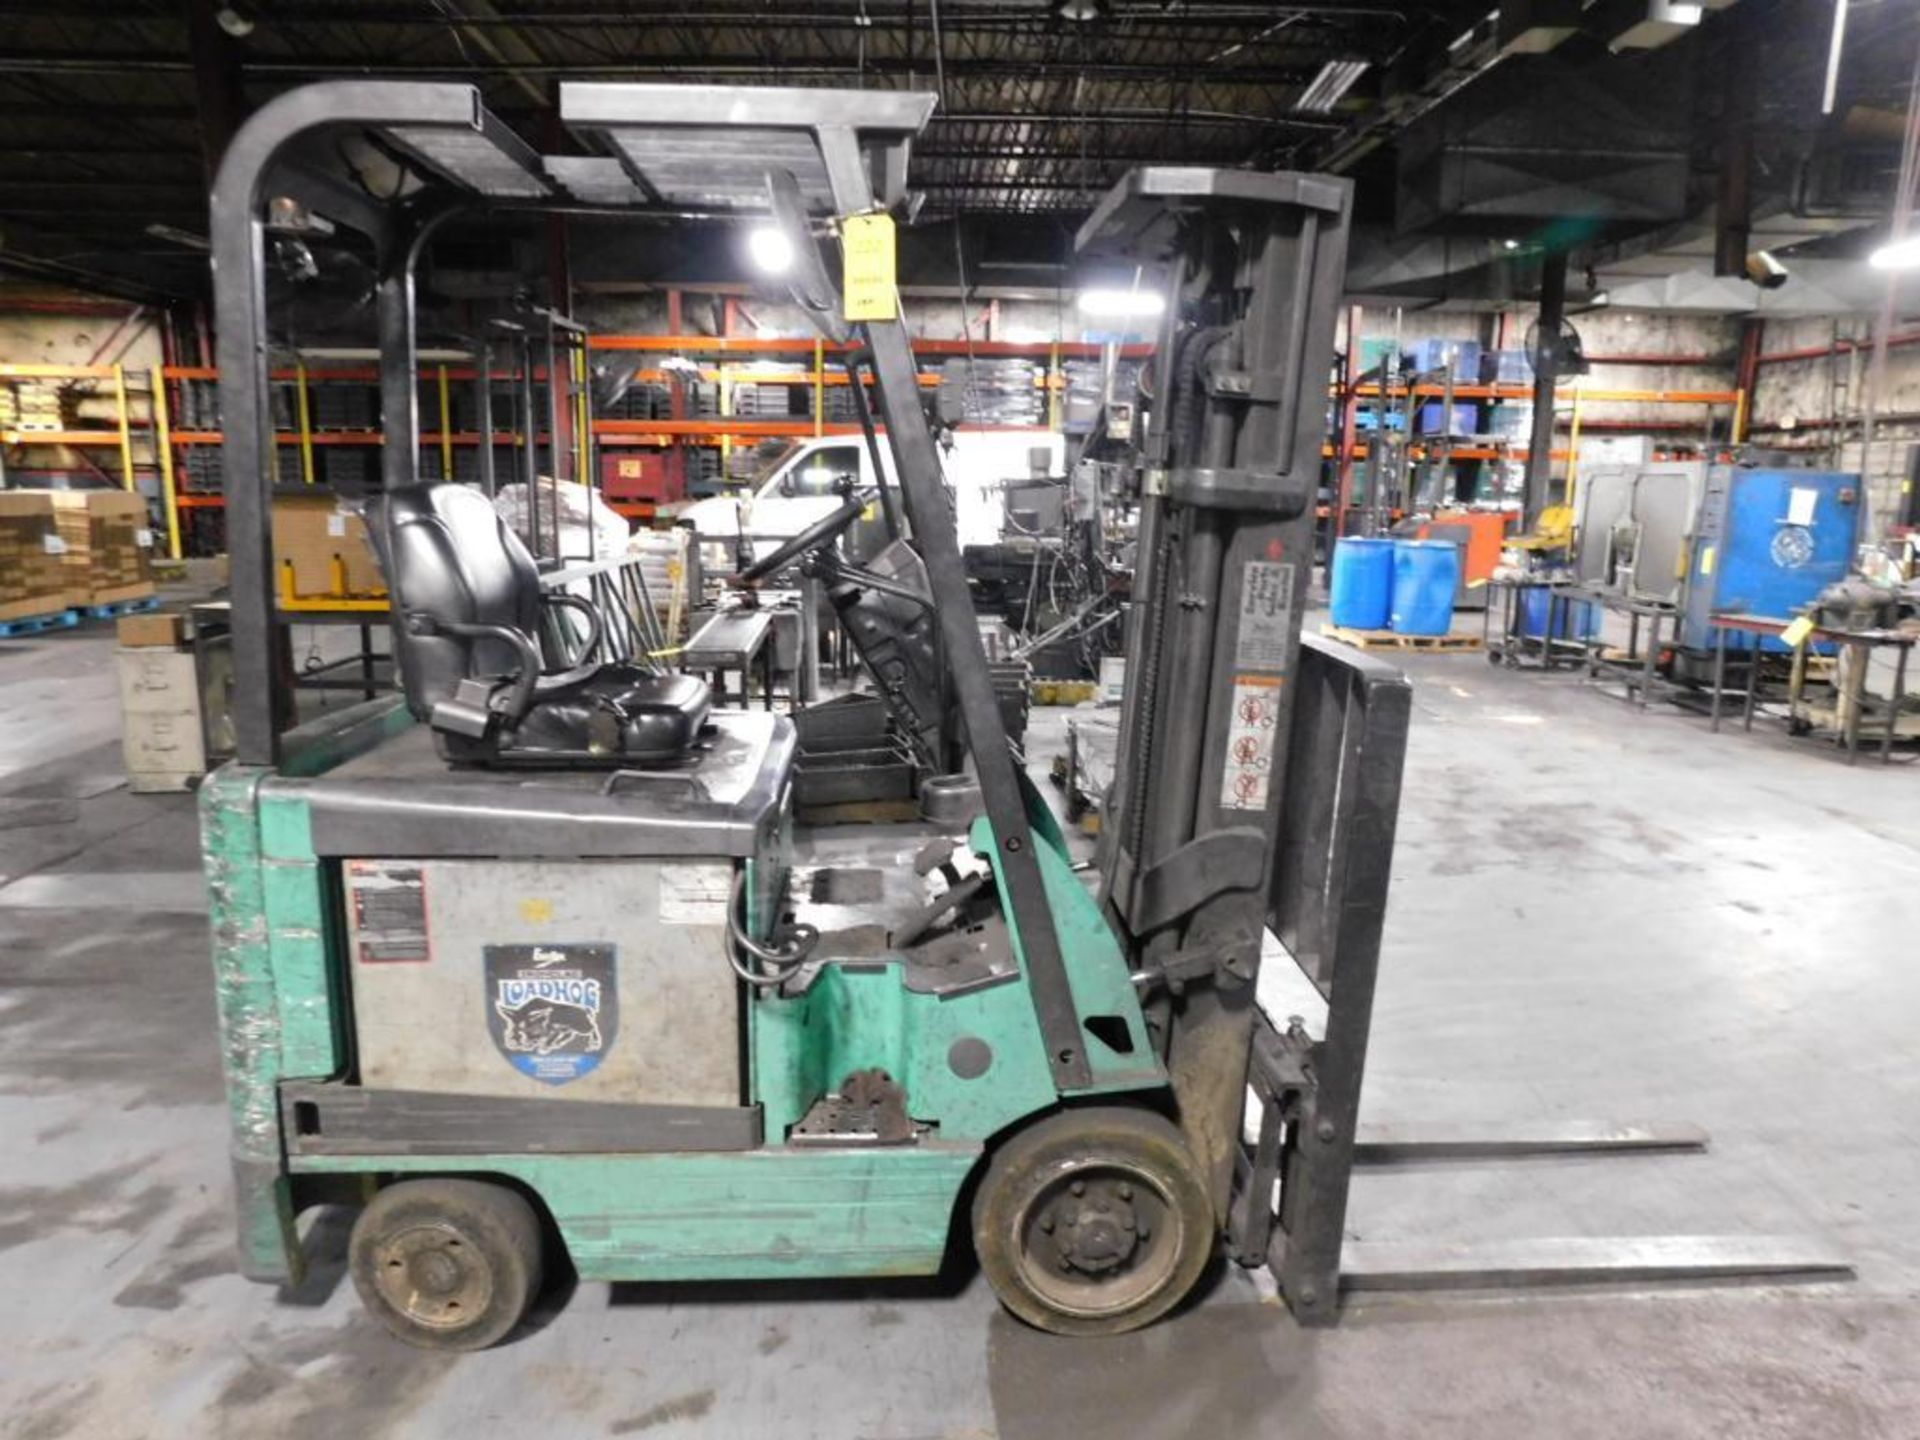 Mitsubishi Electric Forklift Model FBC15N-ACC, 3-Stage Mast, Side Shift, w/Charger, S/N ADC14020Z, 3